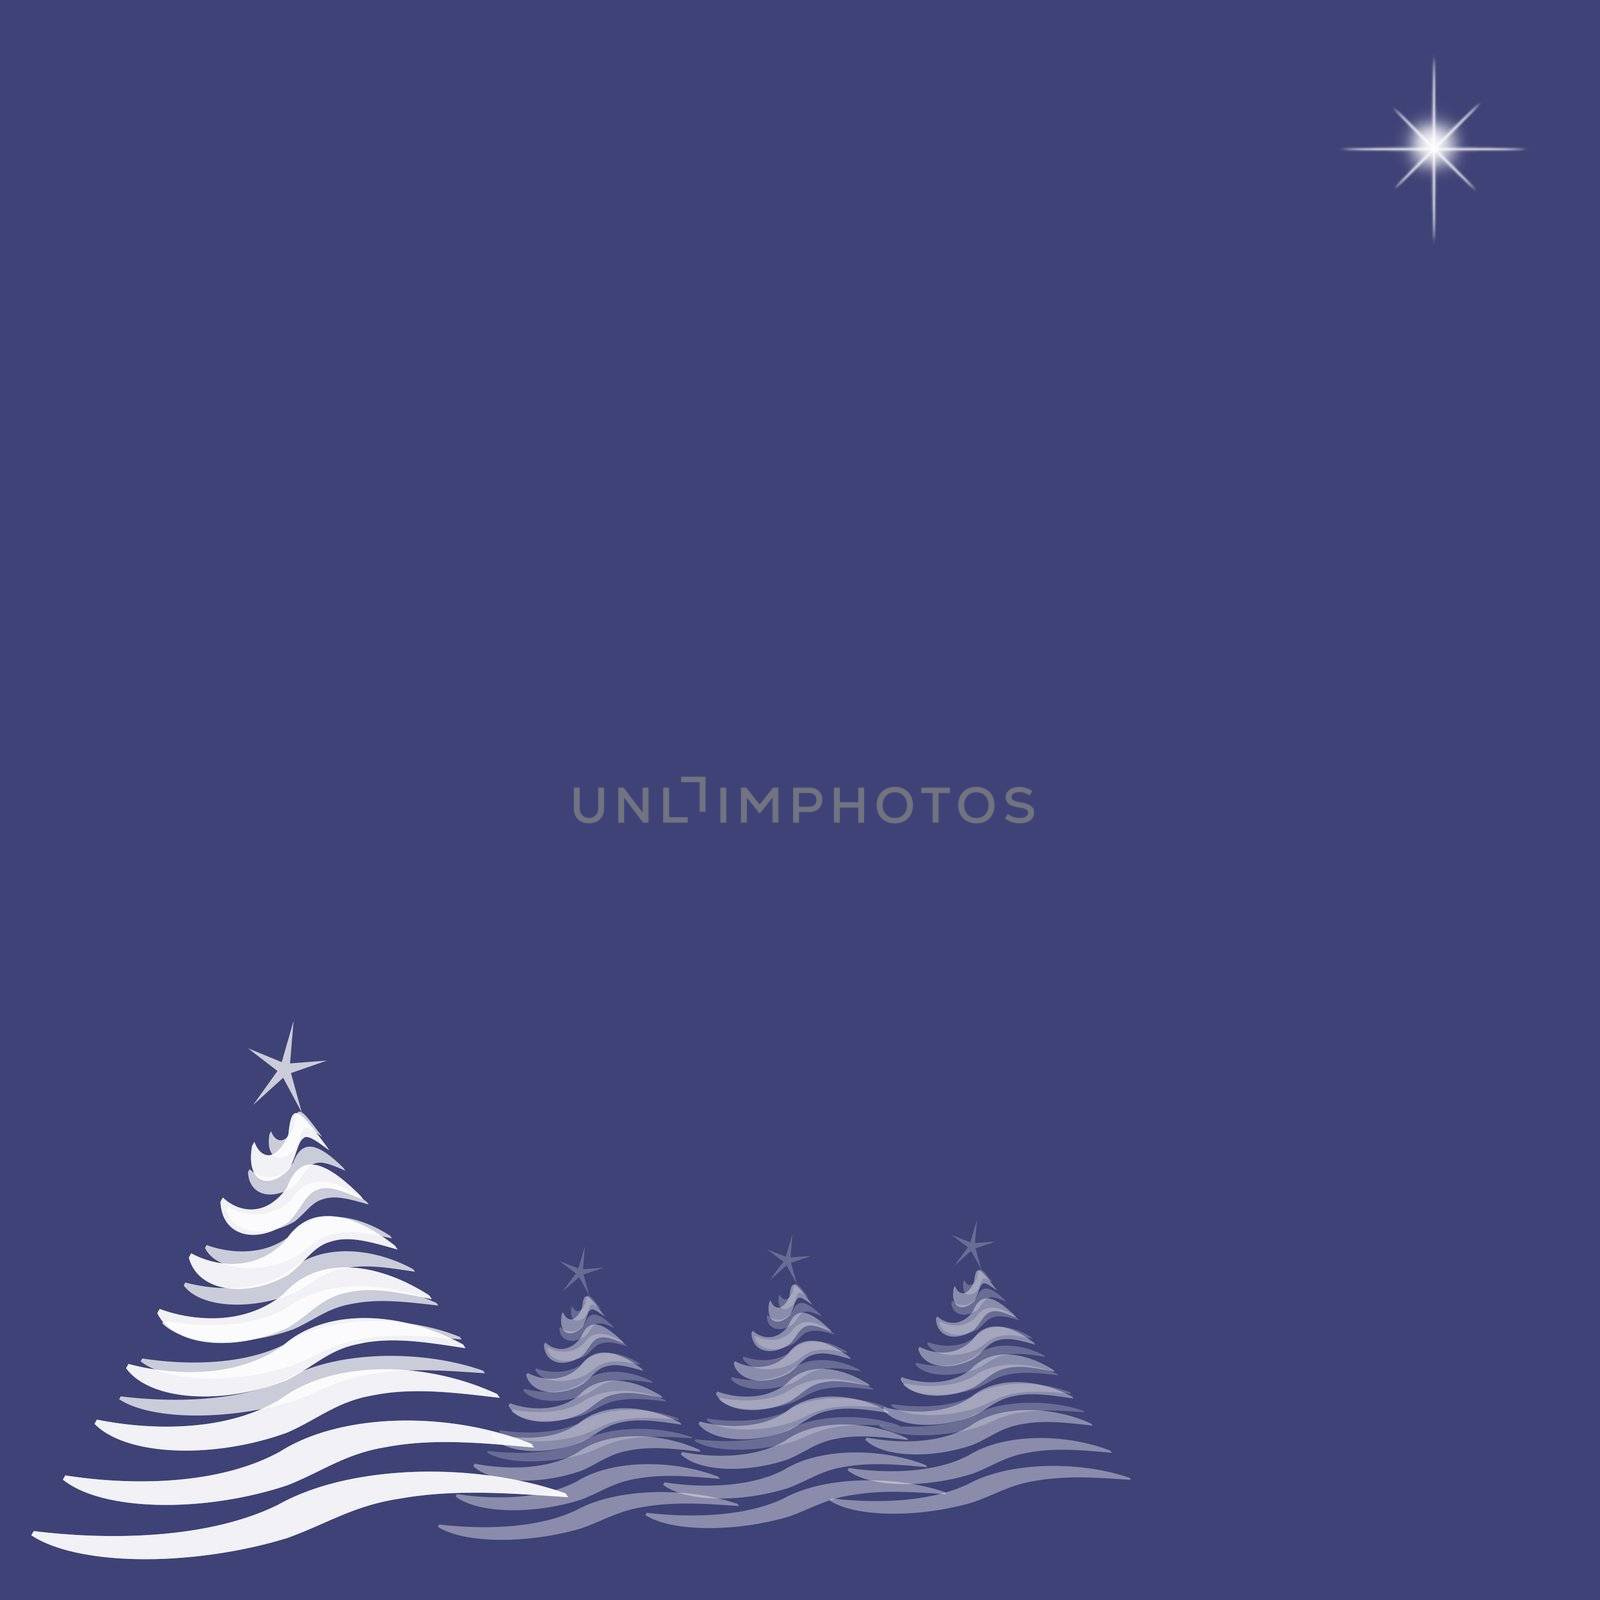 Christmas Trees and Star on Blue Indigo by frannyanne